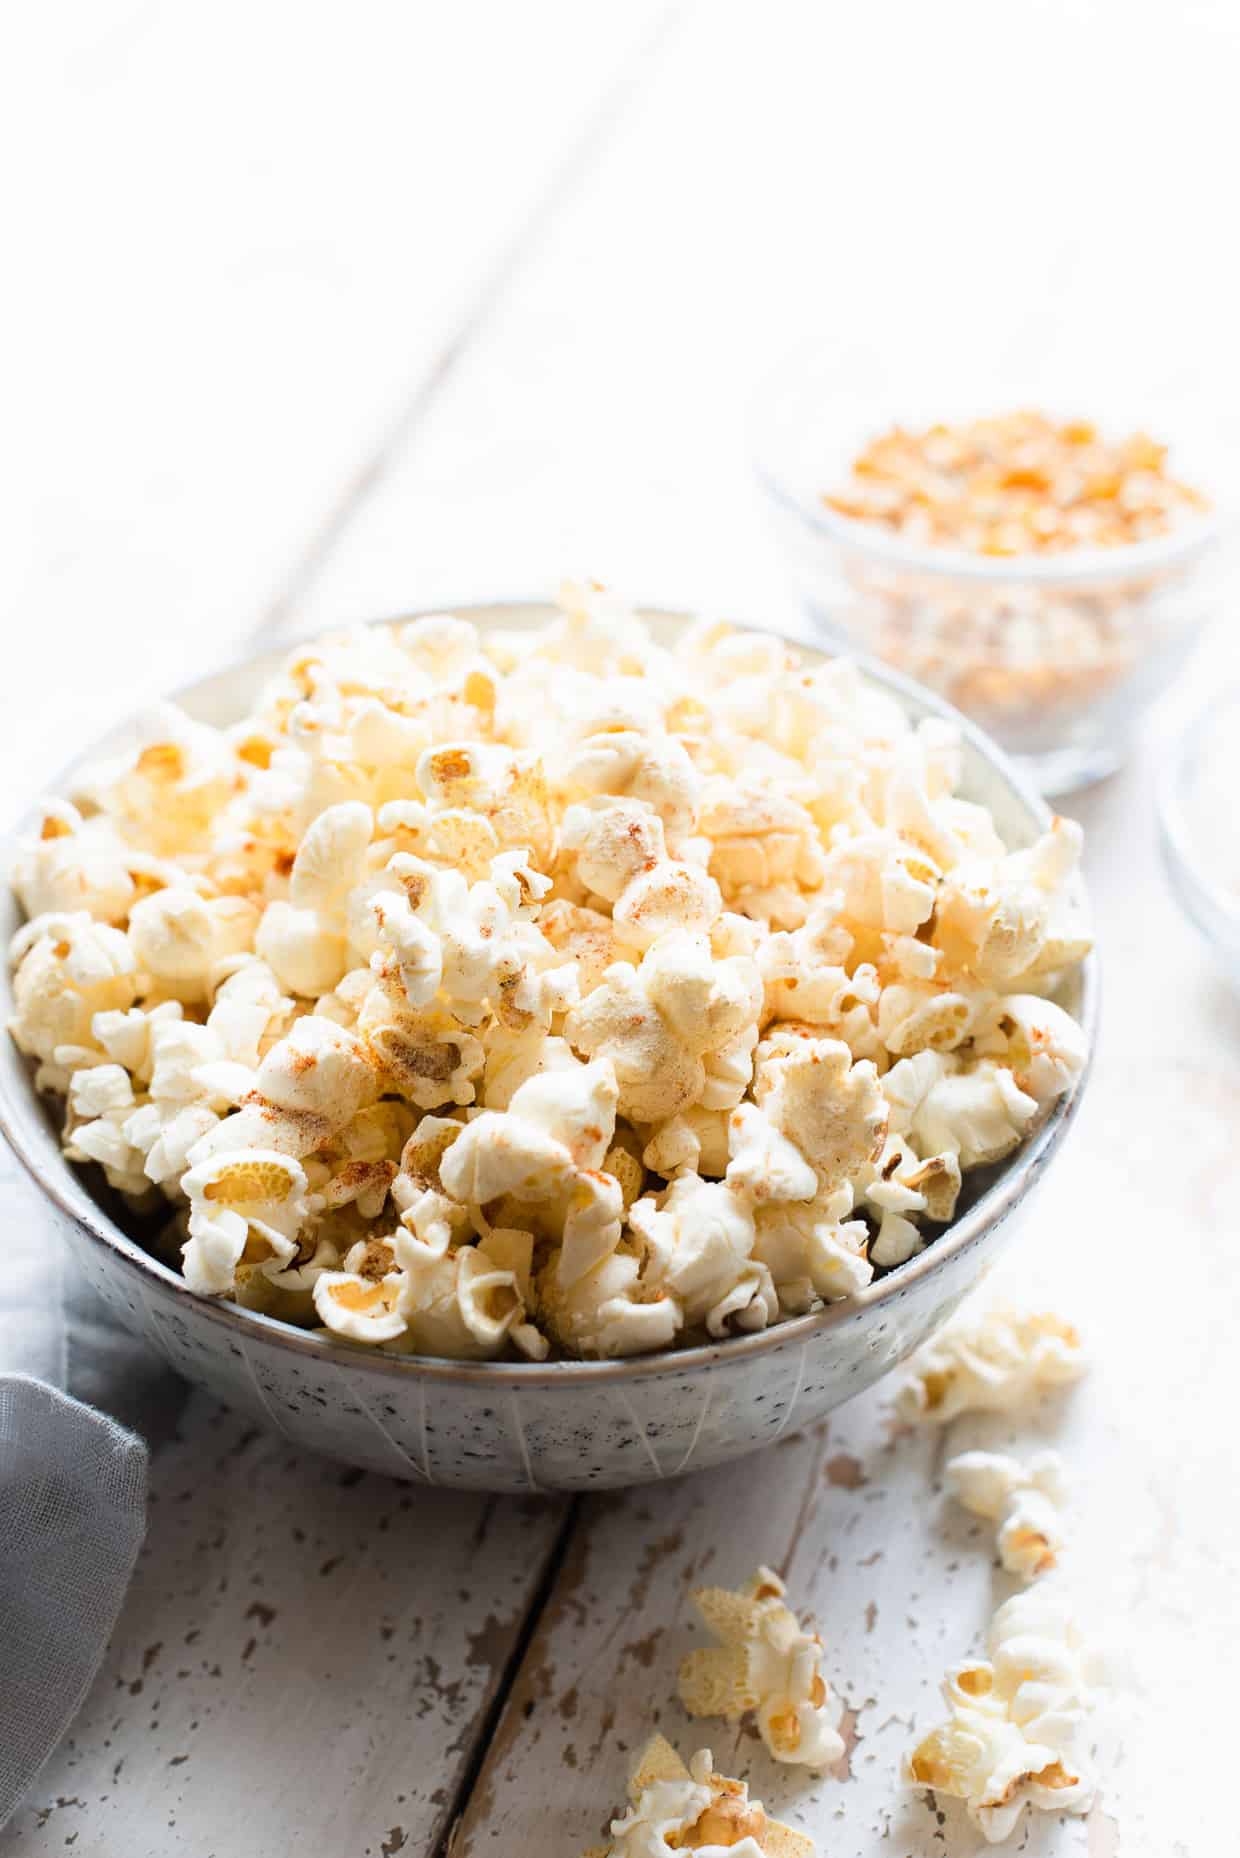 Microwave popcorn gets a healthy spin with this glass popper and optional butter  melter.